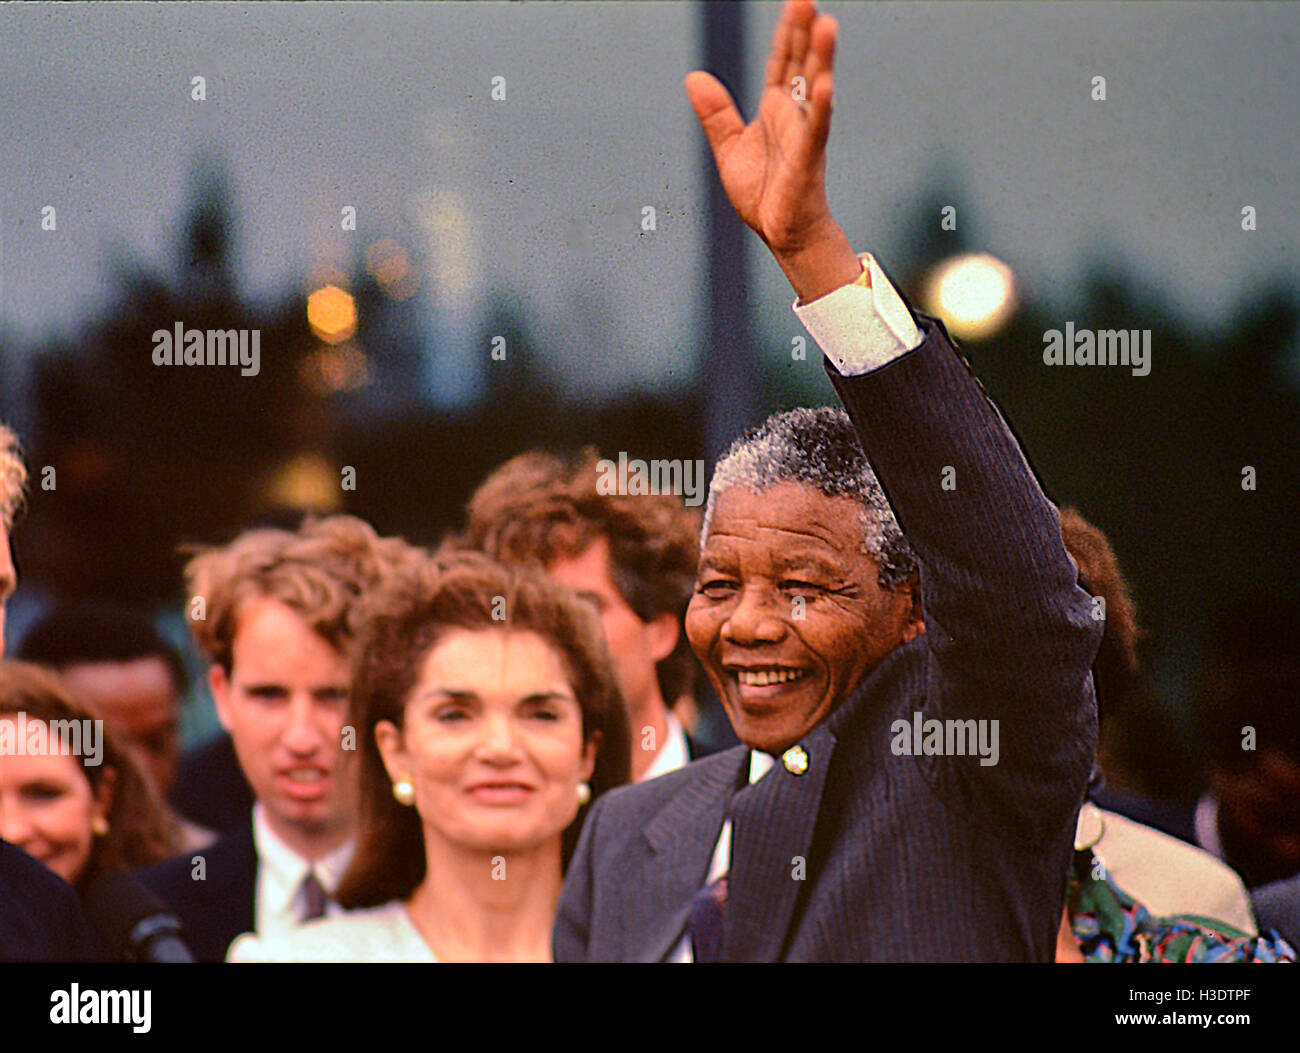 Boston, Massachusetts, USA. 23rd June, 1990. Nelson Mandela at the Kennedy Library in Boston during his first visit to the USA after being release from 26 years in prison on Robbins Island in S.Africa. Standing next to him J. Kennedy-Onassis and other members of the Kennedy family. © Kenneth Martin/ZUMA Wire/Alamy Live News Stock Photo